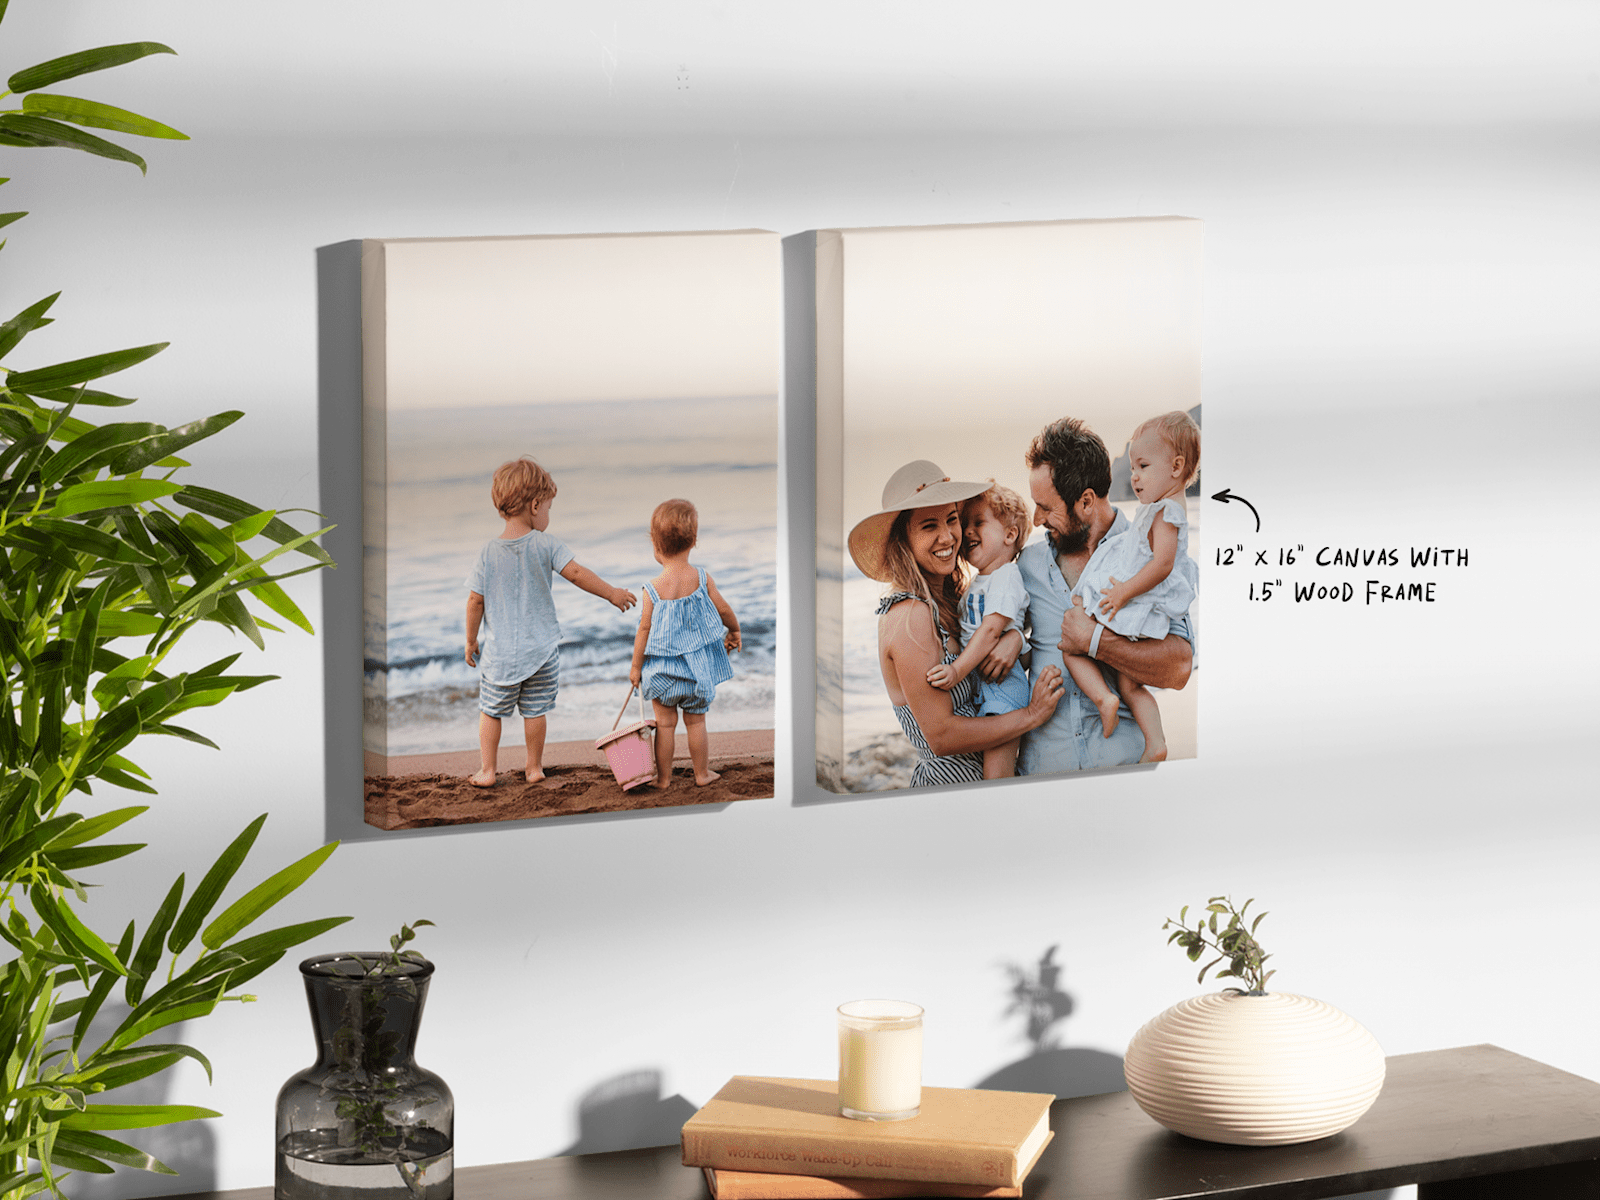 Larger version: Two 12” x 16” photo canvas prints with wood frames showing family pictures at the beach 